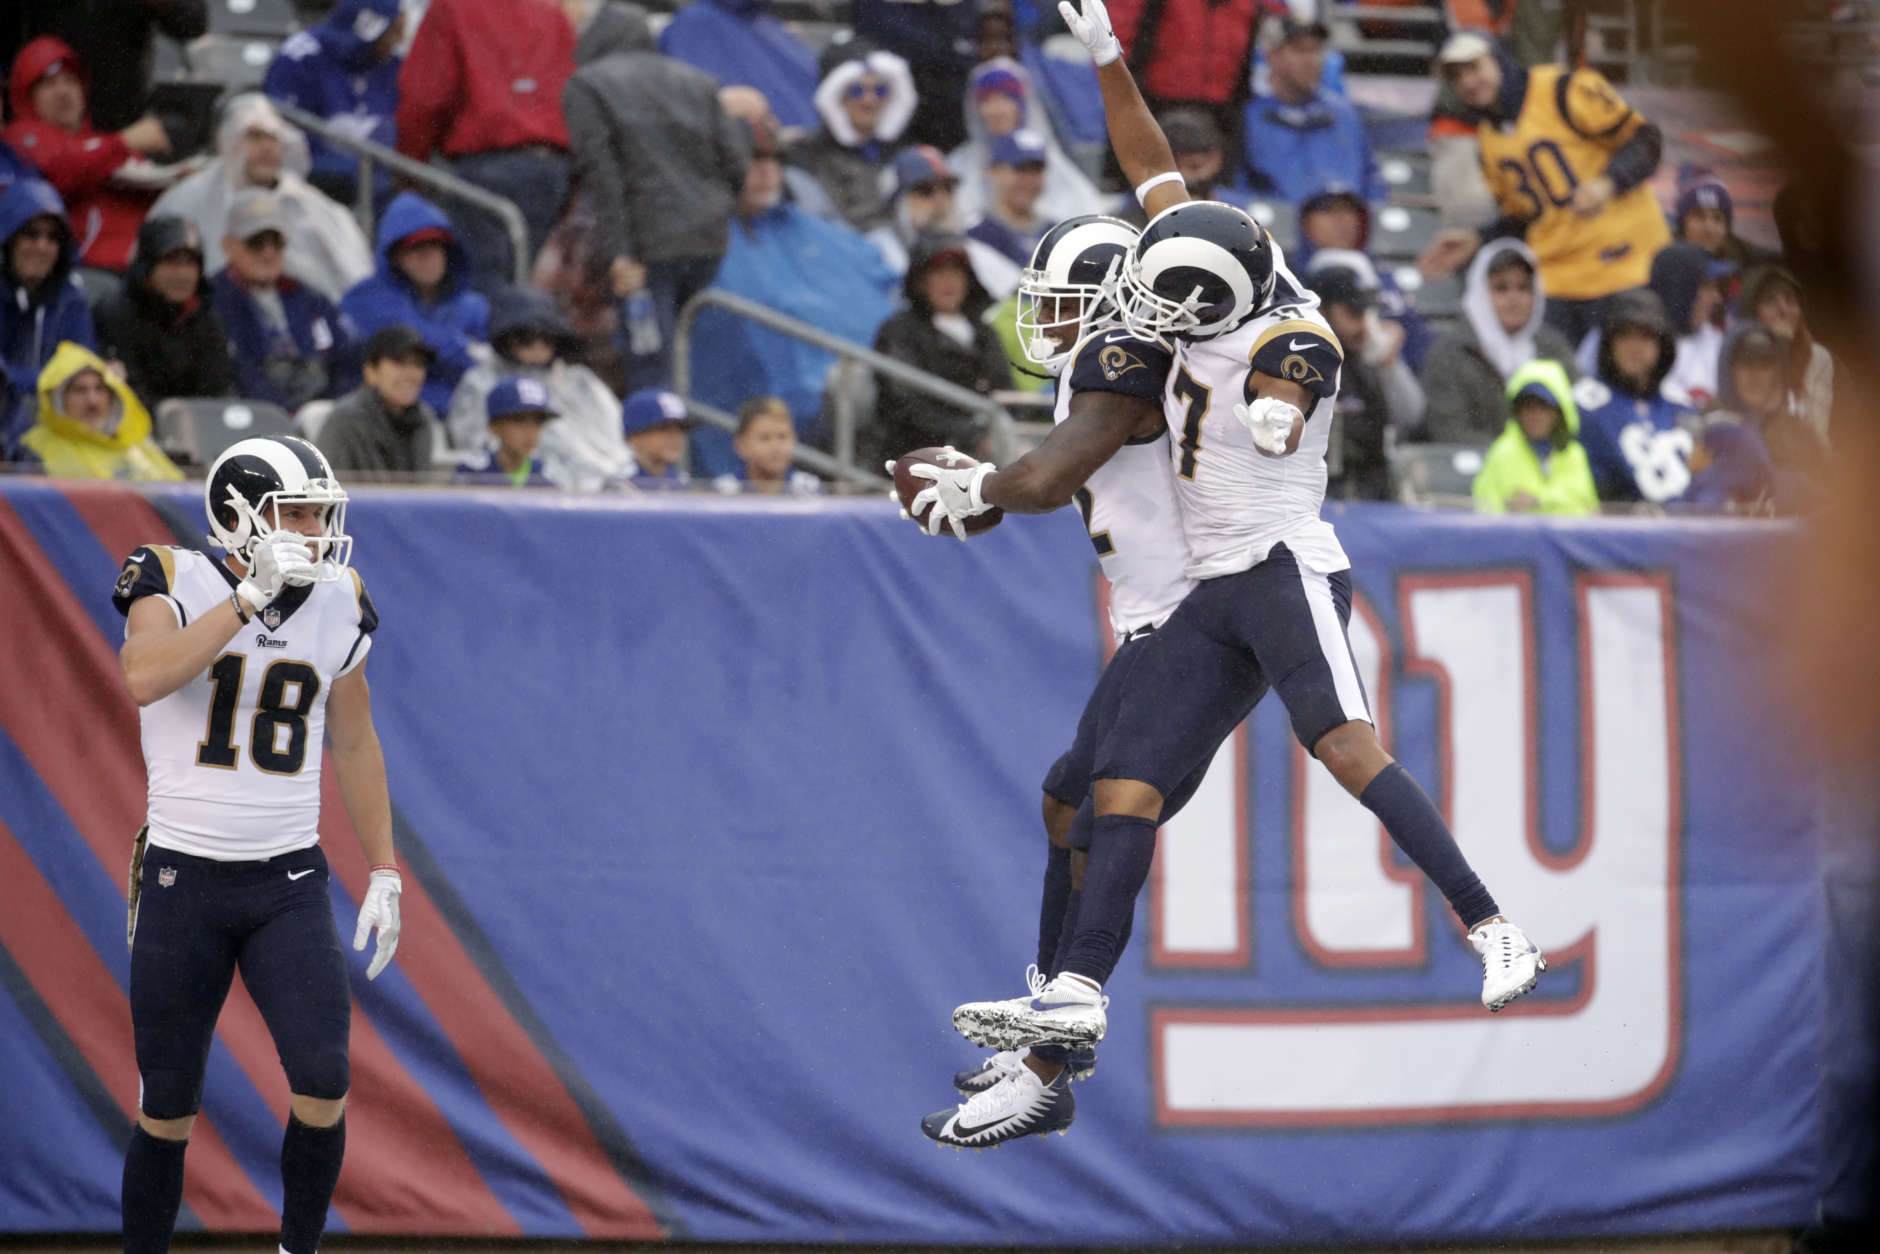 Los Angeles Rams' Sammy Watkins (12) celebrates with teammate Robert Woods (17) as Cooper Kupp (18) watches during the first half of an NFL football game against the New York Giants Sunday, Nov. 5, 2017, in East Rutherford, N.J. (AP Photo/Julio Cortez)